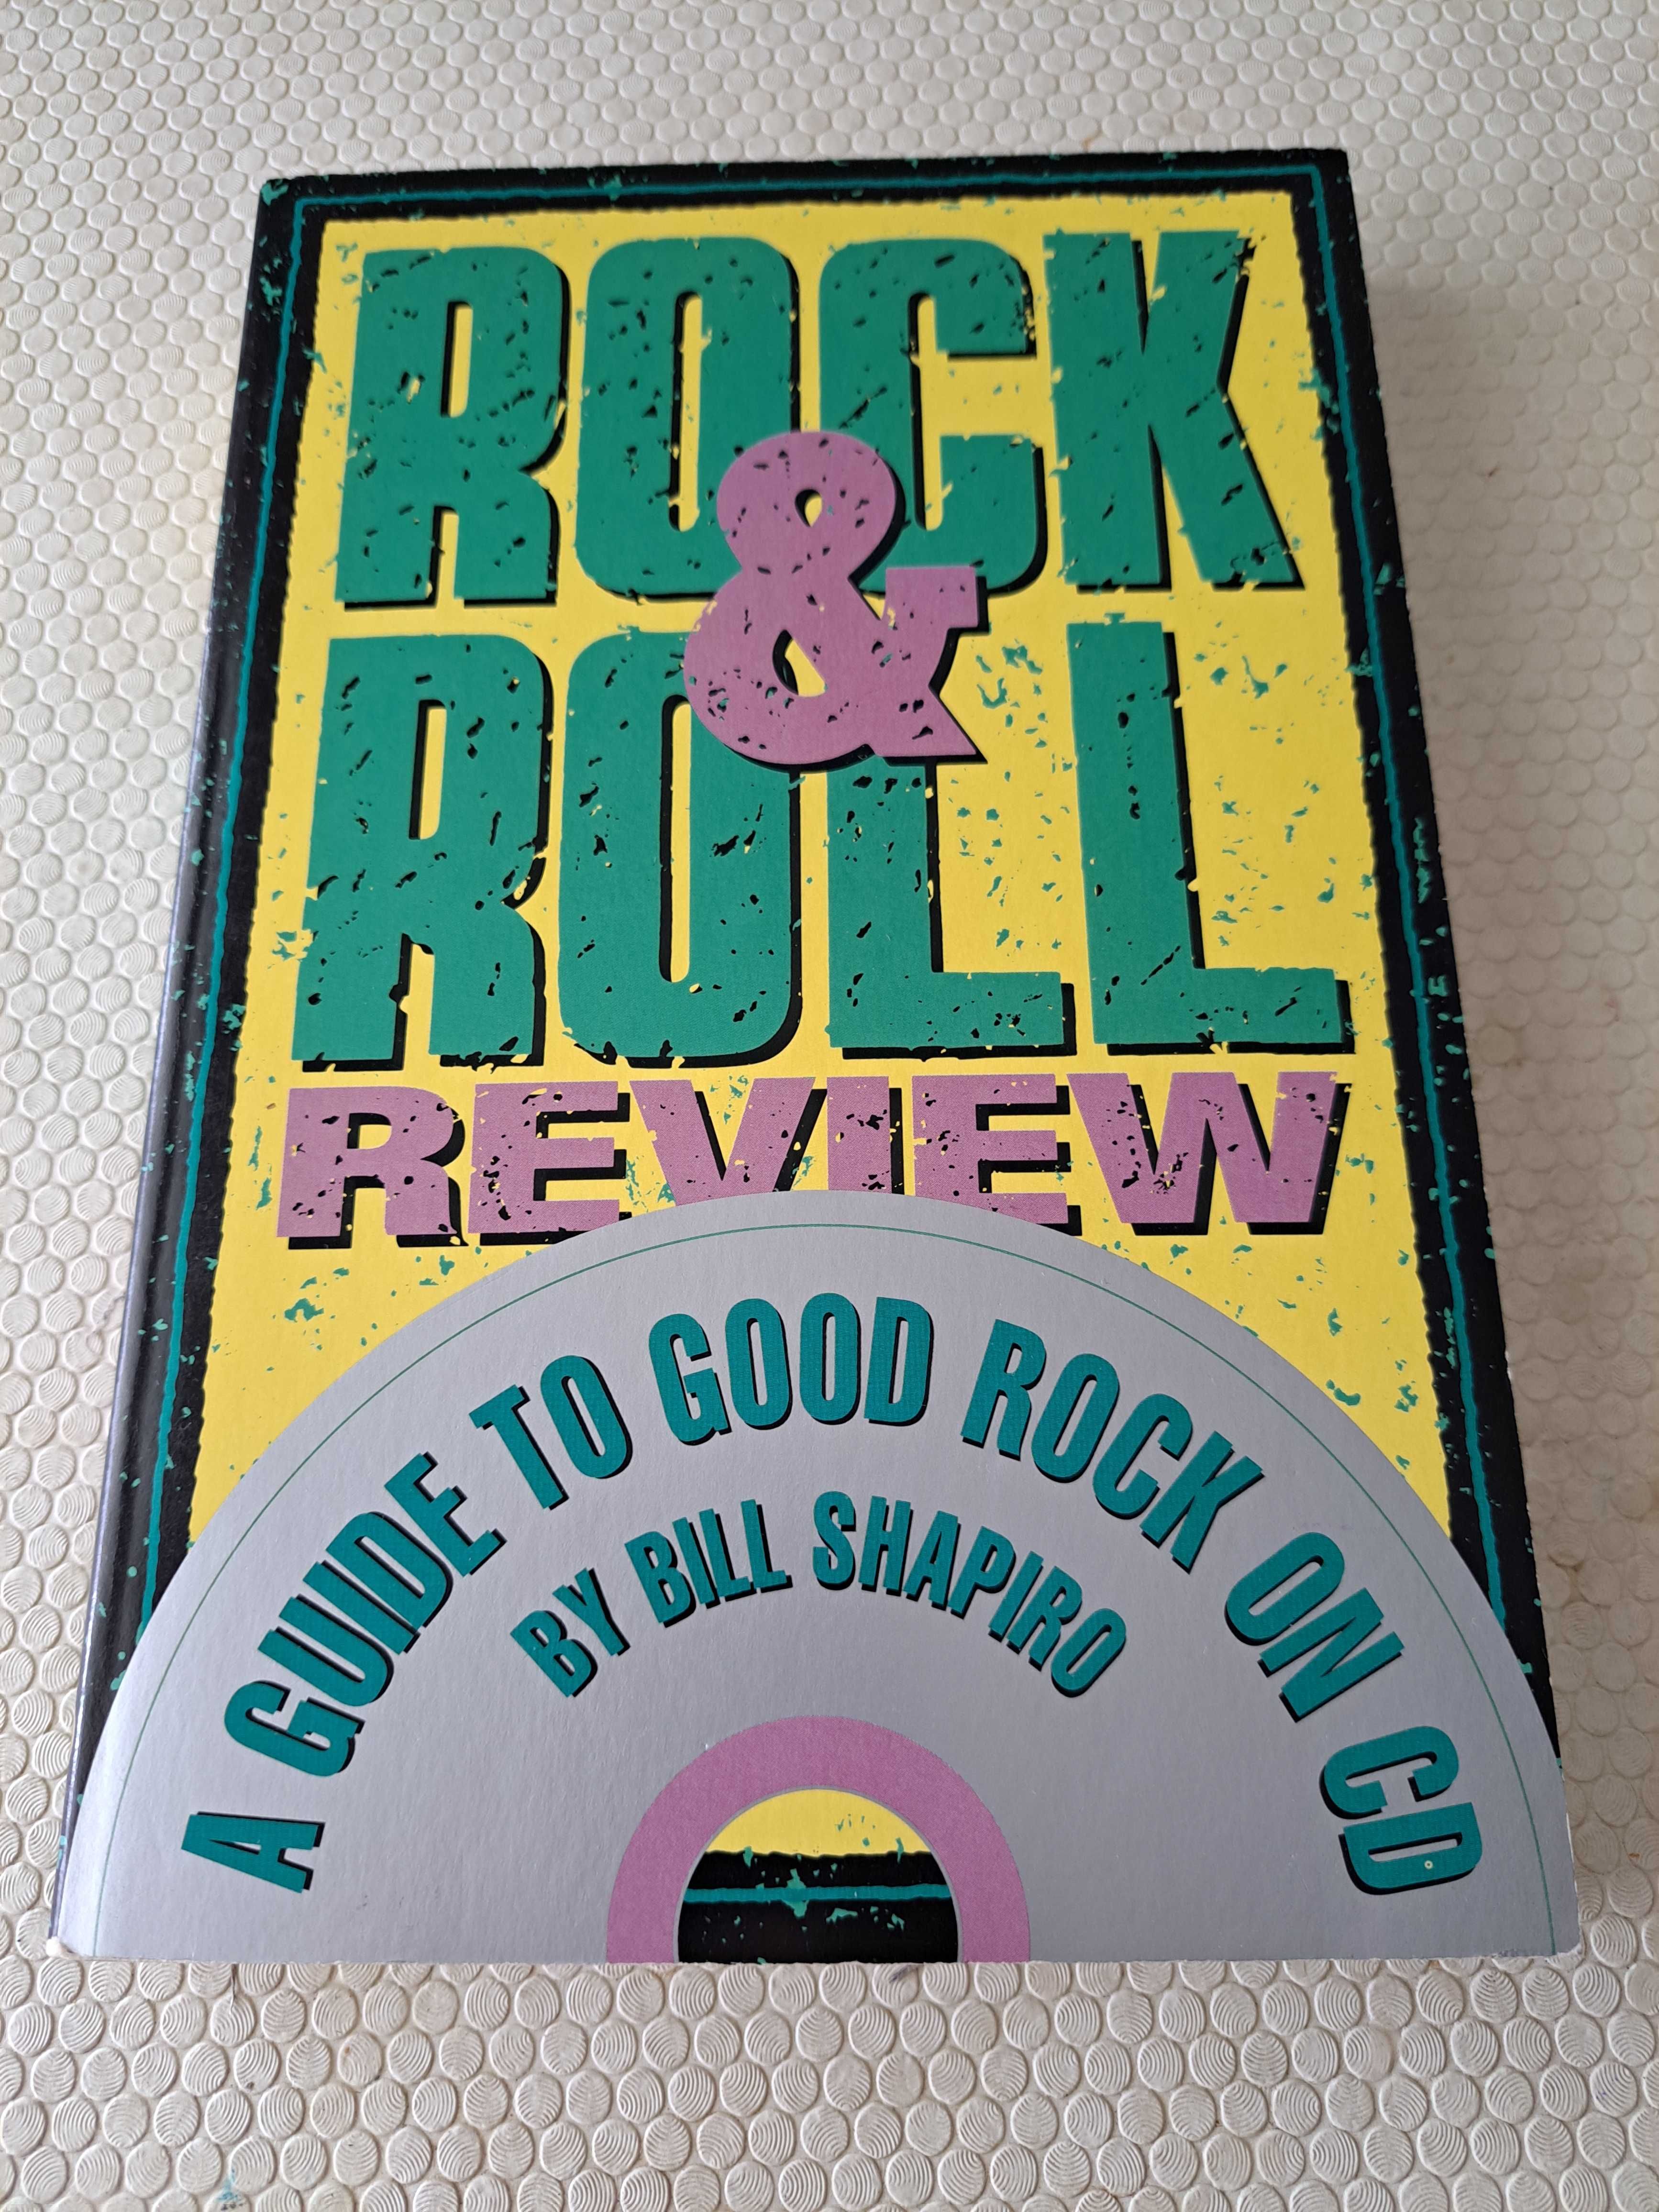 Rock & Roll Review - A Guide to Good Rock on CD - Bill Shapiro